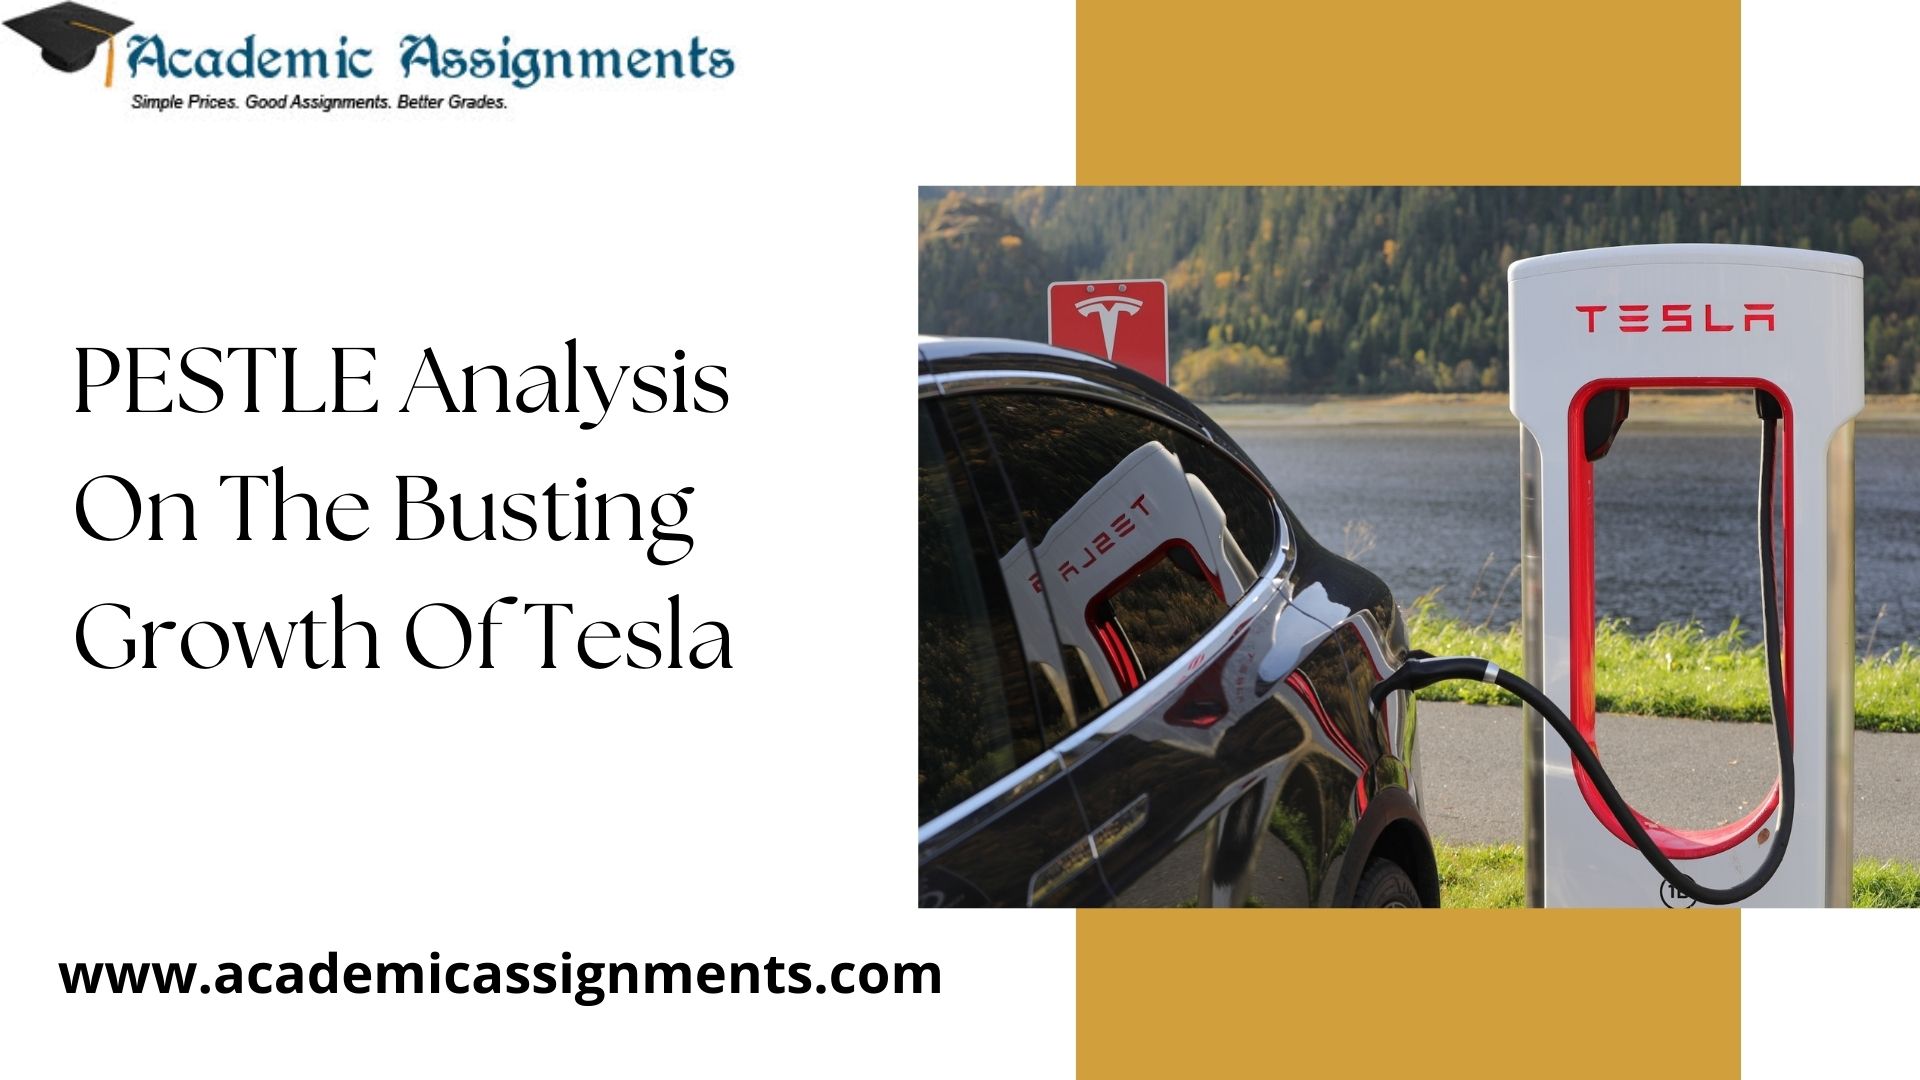 PESTLE Analysis On The Busting Growth Of Tesla